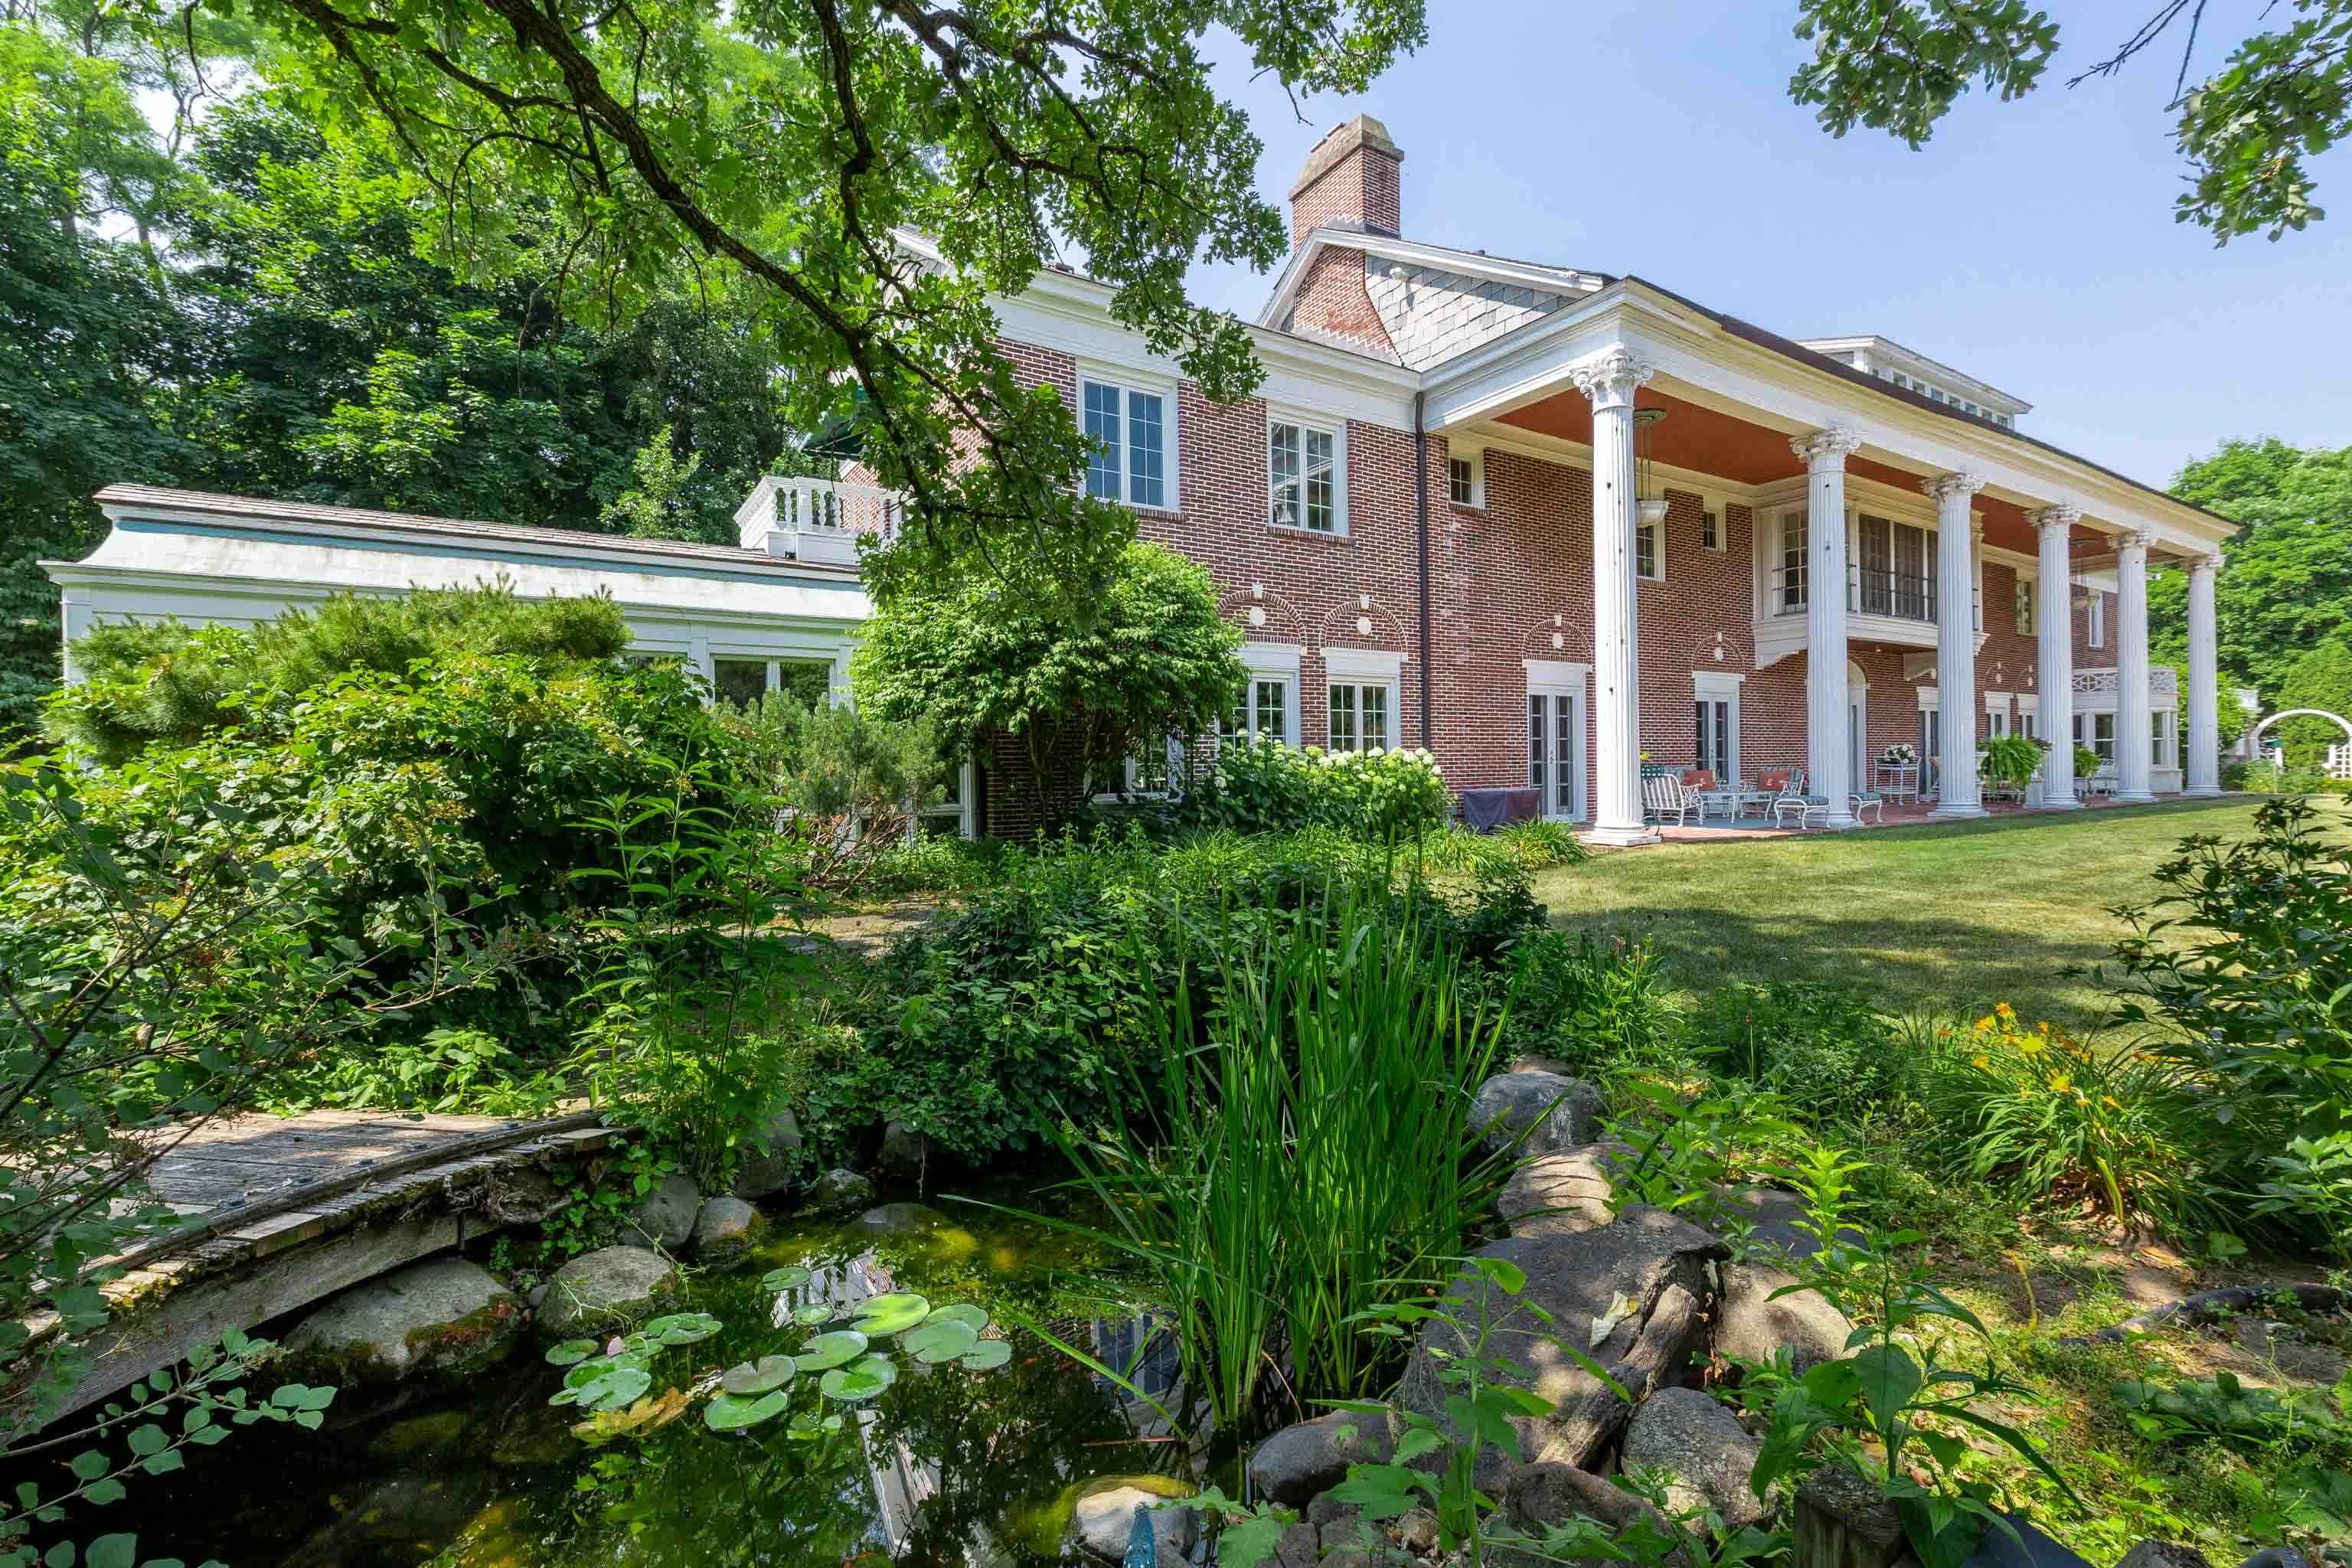 The storied history of this stunning estate named "Edenfred" includes grand parties w/famous guests who enjoyed evenings on the veranda, a dip in the pool, or a formal meal at the 20-person table in the dining rm. Since 1917 it has been a family home, an artist's retreat, & now it awaits its next chapter. A unique find on the west side, the home was built to make the most of natural light & cross breezes. Spacious main level rooms, incl the LR, bar, 3-season rm, dining rm + kitchen have beautiful architectural details & feature an easy indoor-outdoor flow. The 2nd floor highlights incl a sleeping porch & main bdrm w/fp, 2 baths + large dressing rm. plus 3 bdrm ensuites. 3rd floor has lots of fun space too. Not incl in Total SF: 3-seasn pool house w/LR, kitchen, full bath + fp.